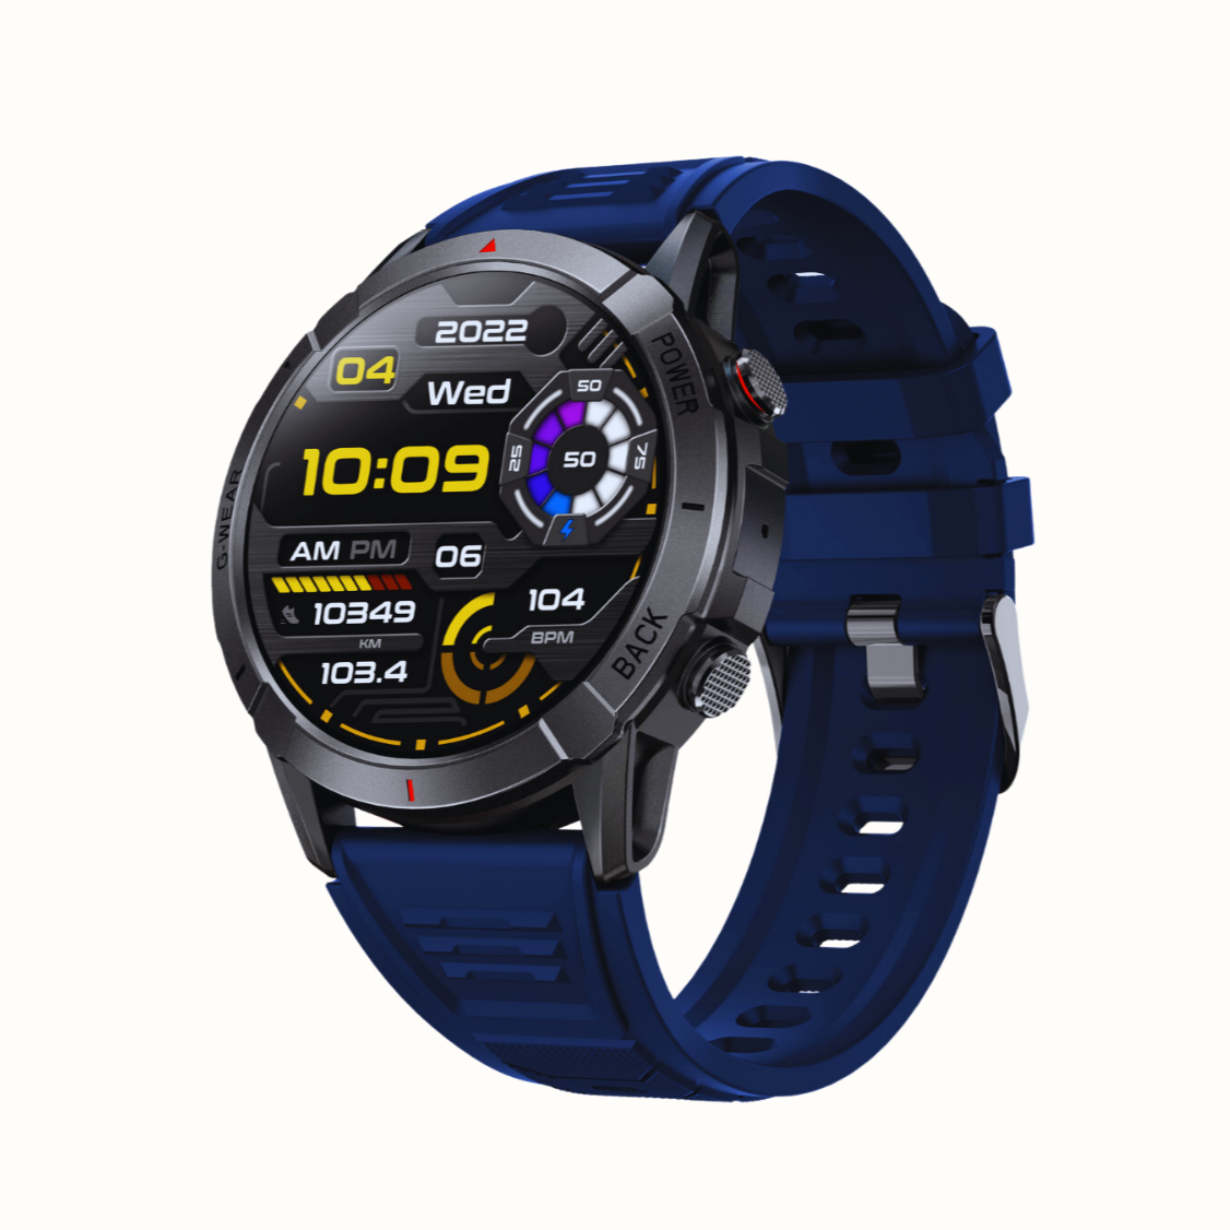 NX10 Sport Smartwatch, AMOLED Display, Setup with Android device, Setup with Apple Device, Water resistance - IP68, Best Smart Watch, 2023, Track Activity,Track WOmens Health, Pedometer, Calorie Monitor, Sleep Tracking, Heart Rate Monitor, Blood Oxygen Monitor- Spo2, Multisport Mode, Color - Blue